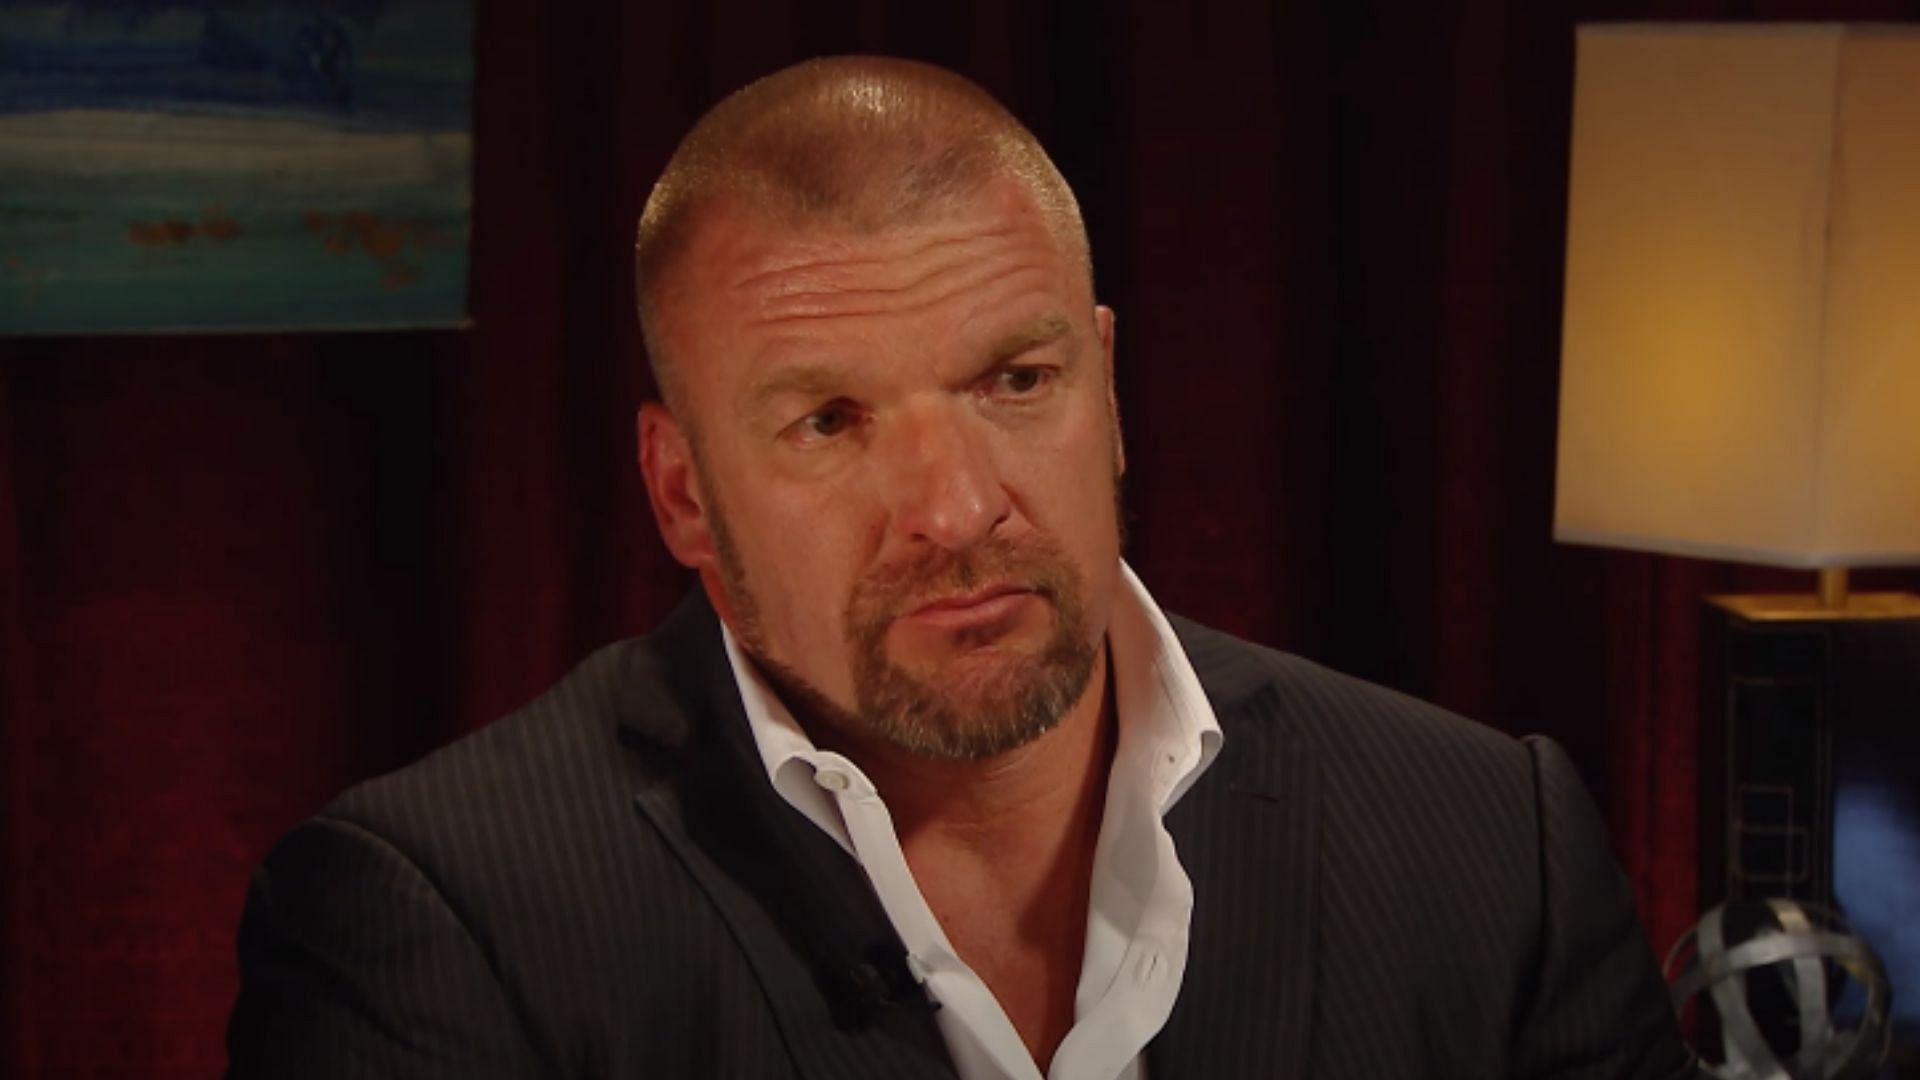 NXT founder and 14-time World Champion Triple H